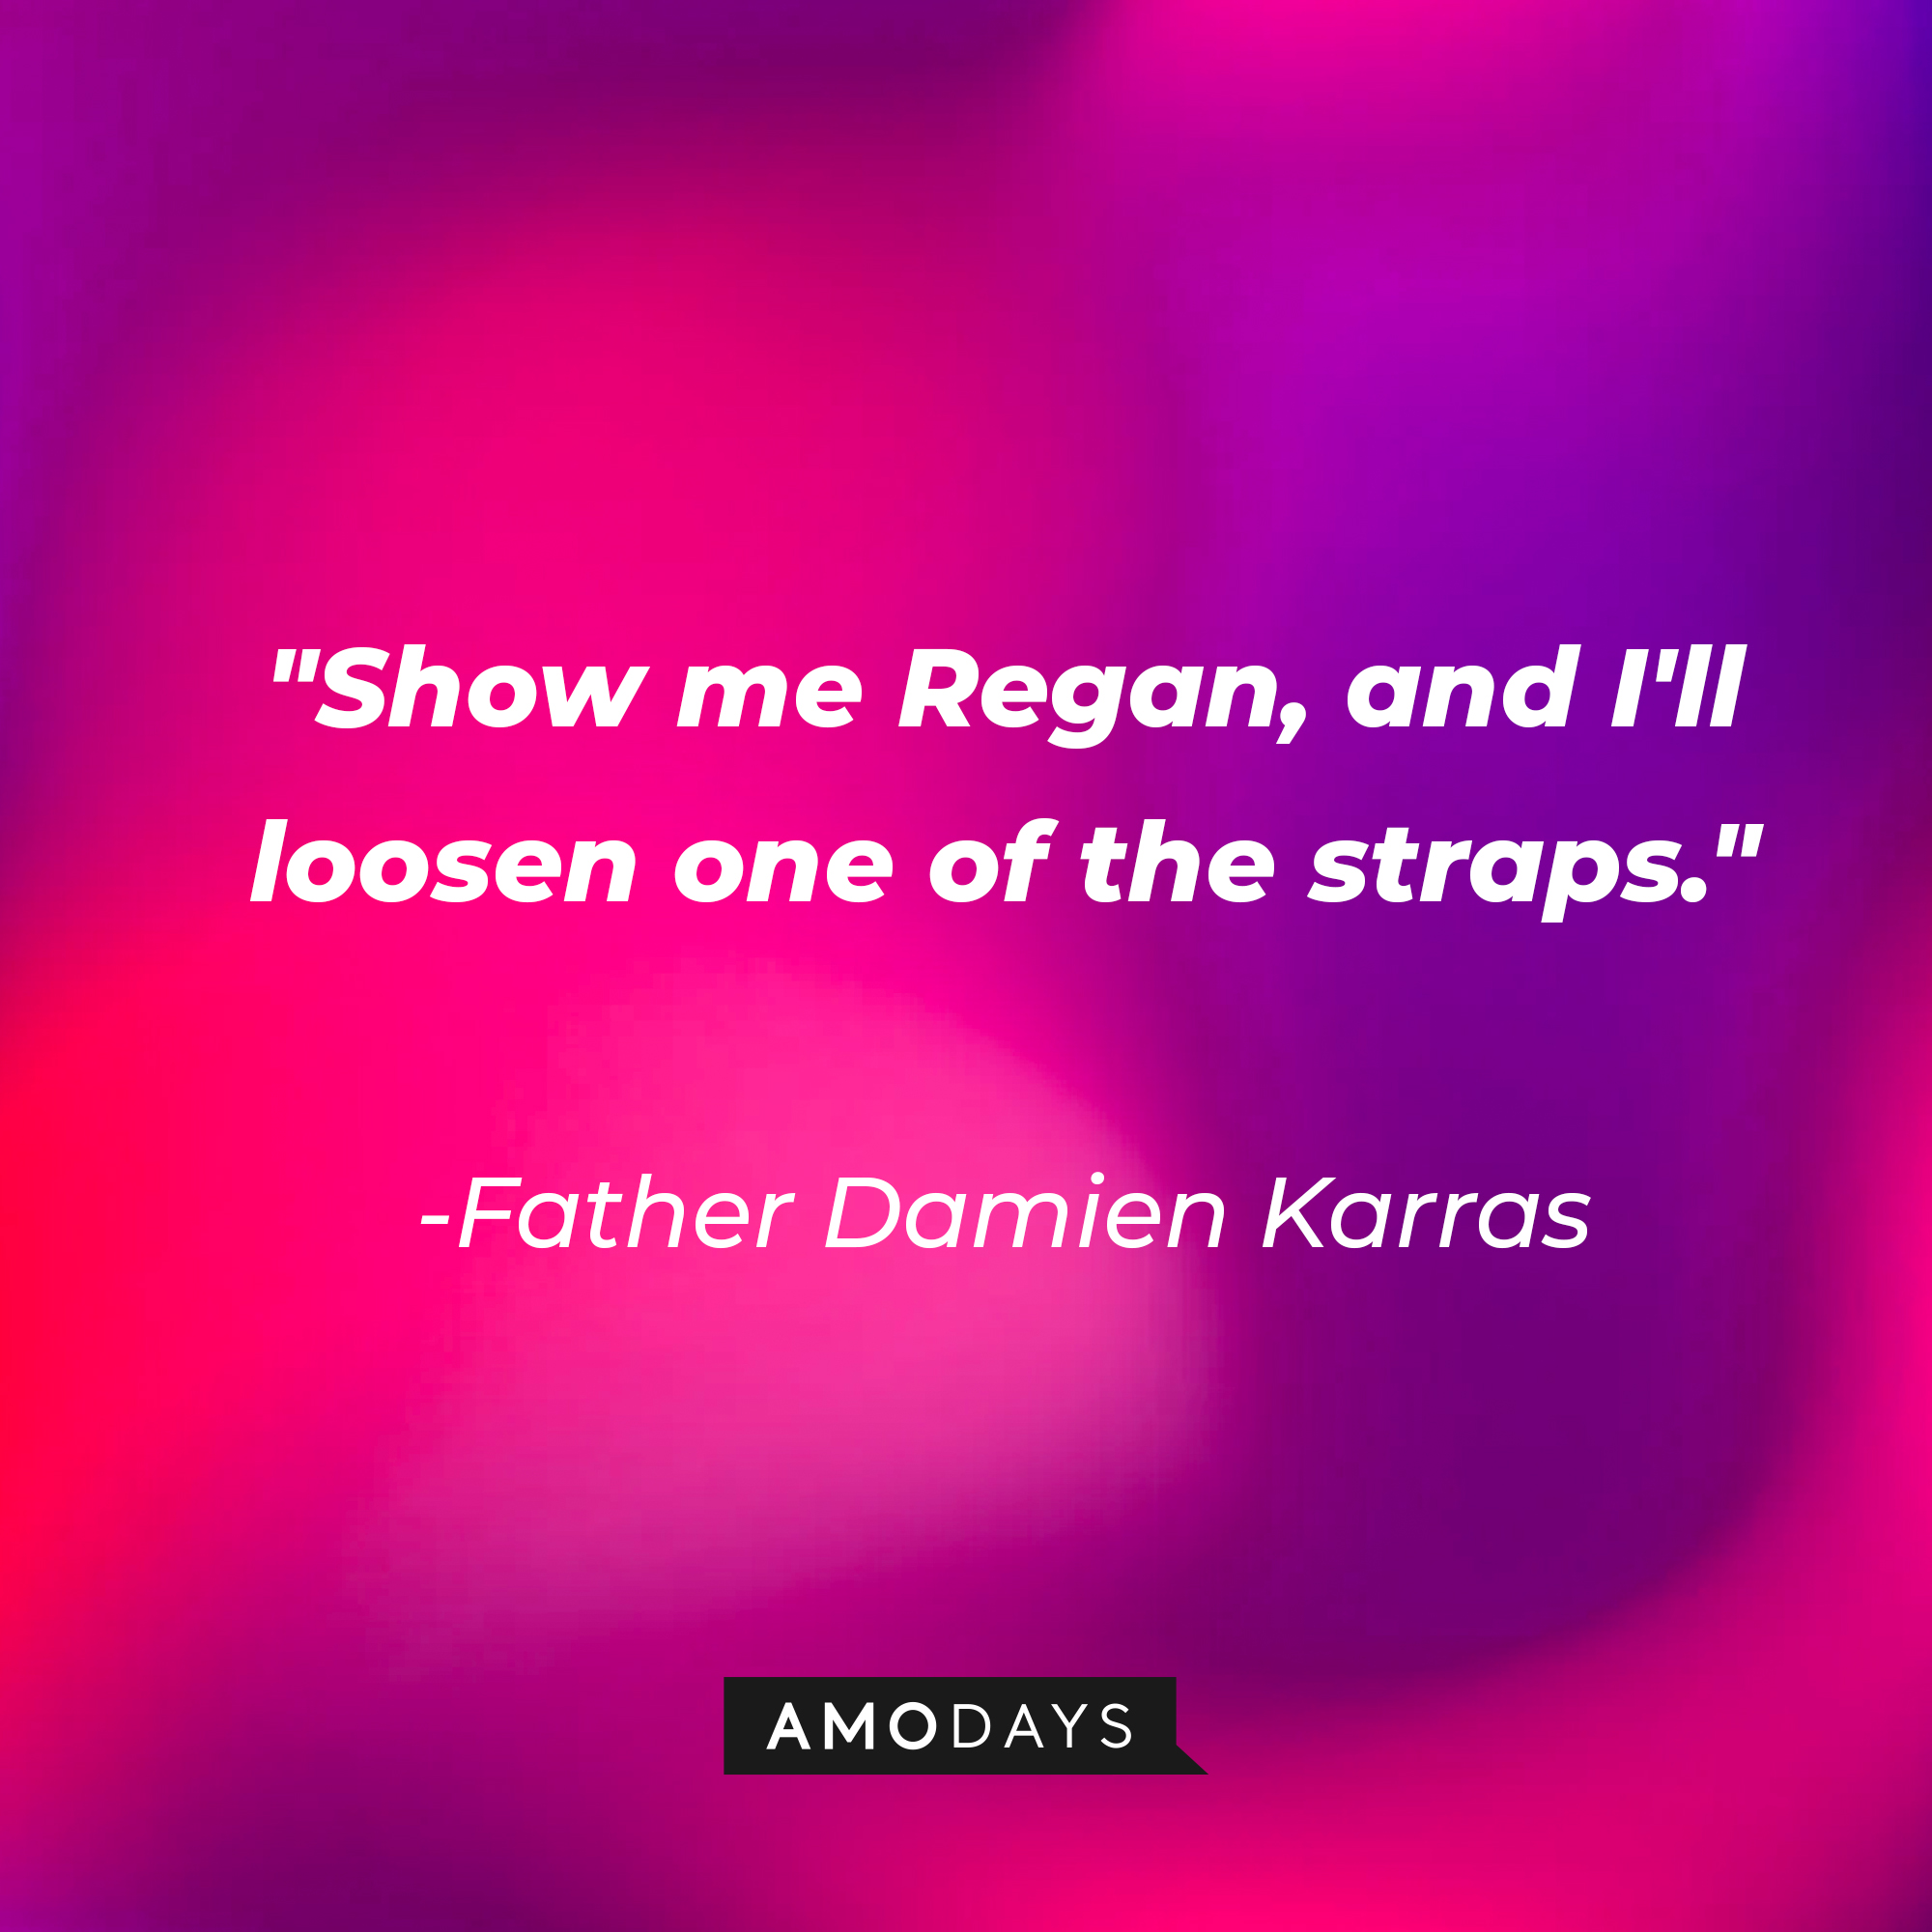 Father Damien Karras' quote: "Show me Regan, and I'll loosen one of the straps." | Source: AmoDays